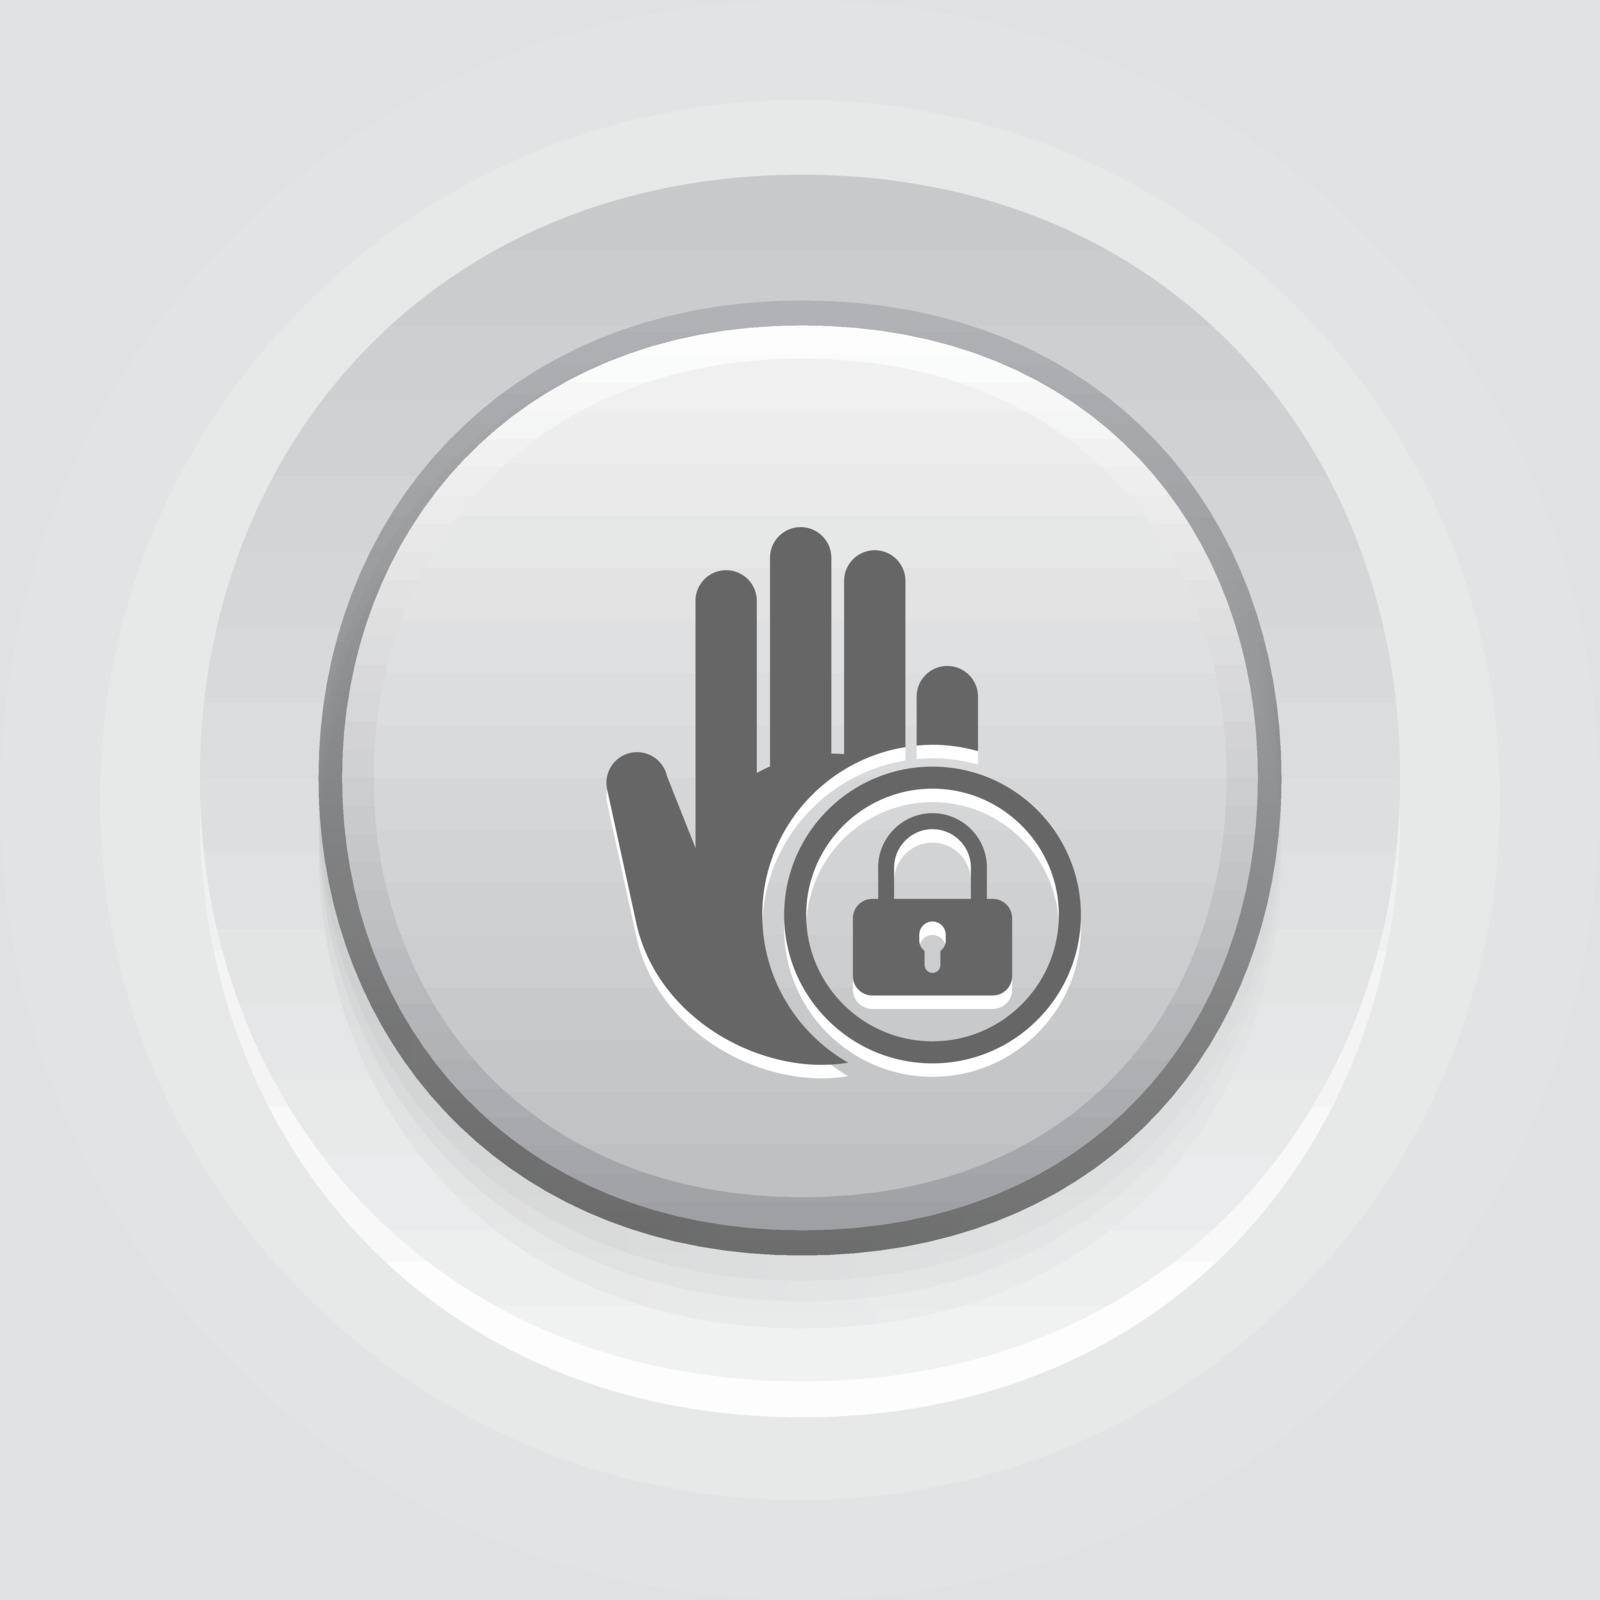 Restricted Area Icon. Flat Design Grey Button Design